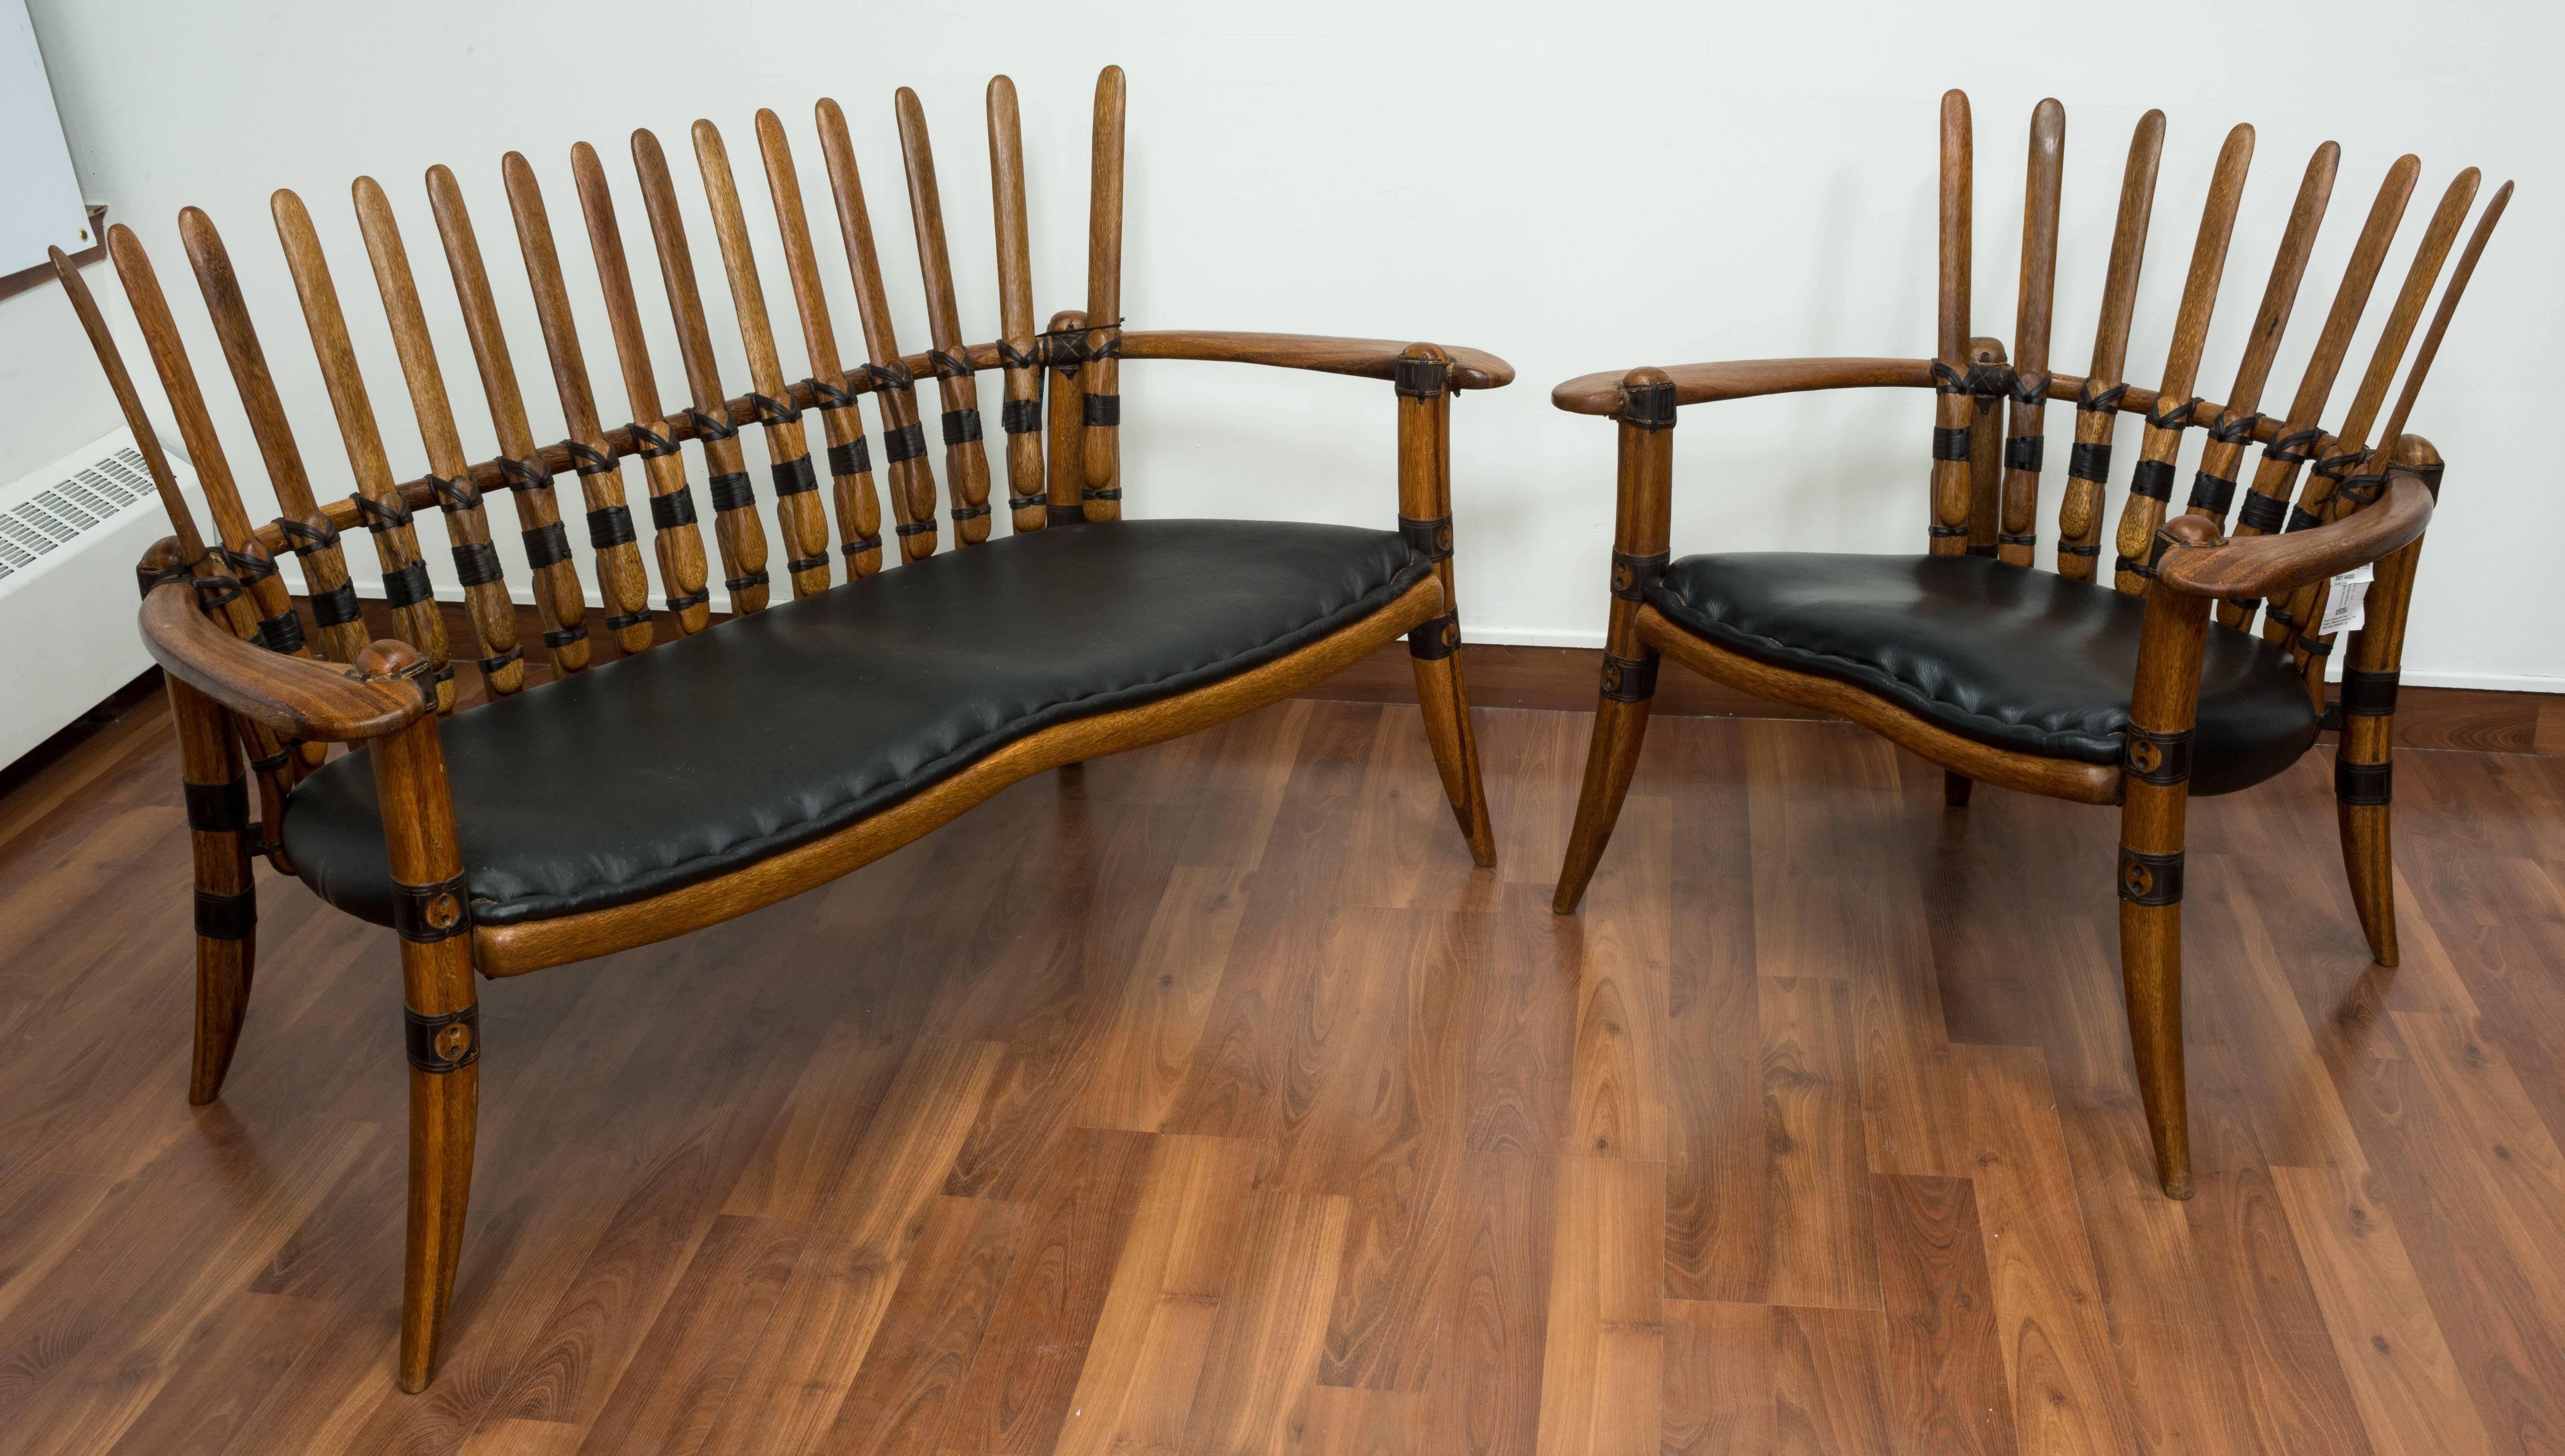 Polished palmwood frames. Joints made of leather bindings previously used for ax handles. Latex seats upholstered in black leather, backs in lambskin.
Bruce Dowse for Pacific Green.
Measures: Sofa: H 85, W 145, D 77 cm.